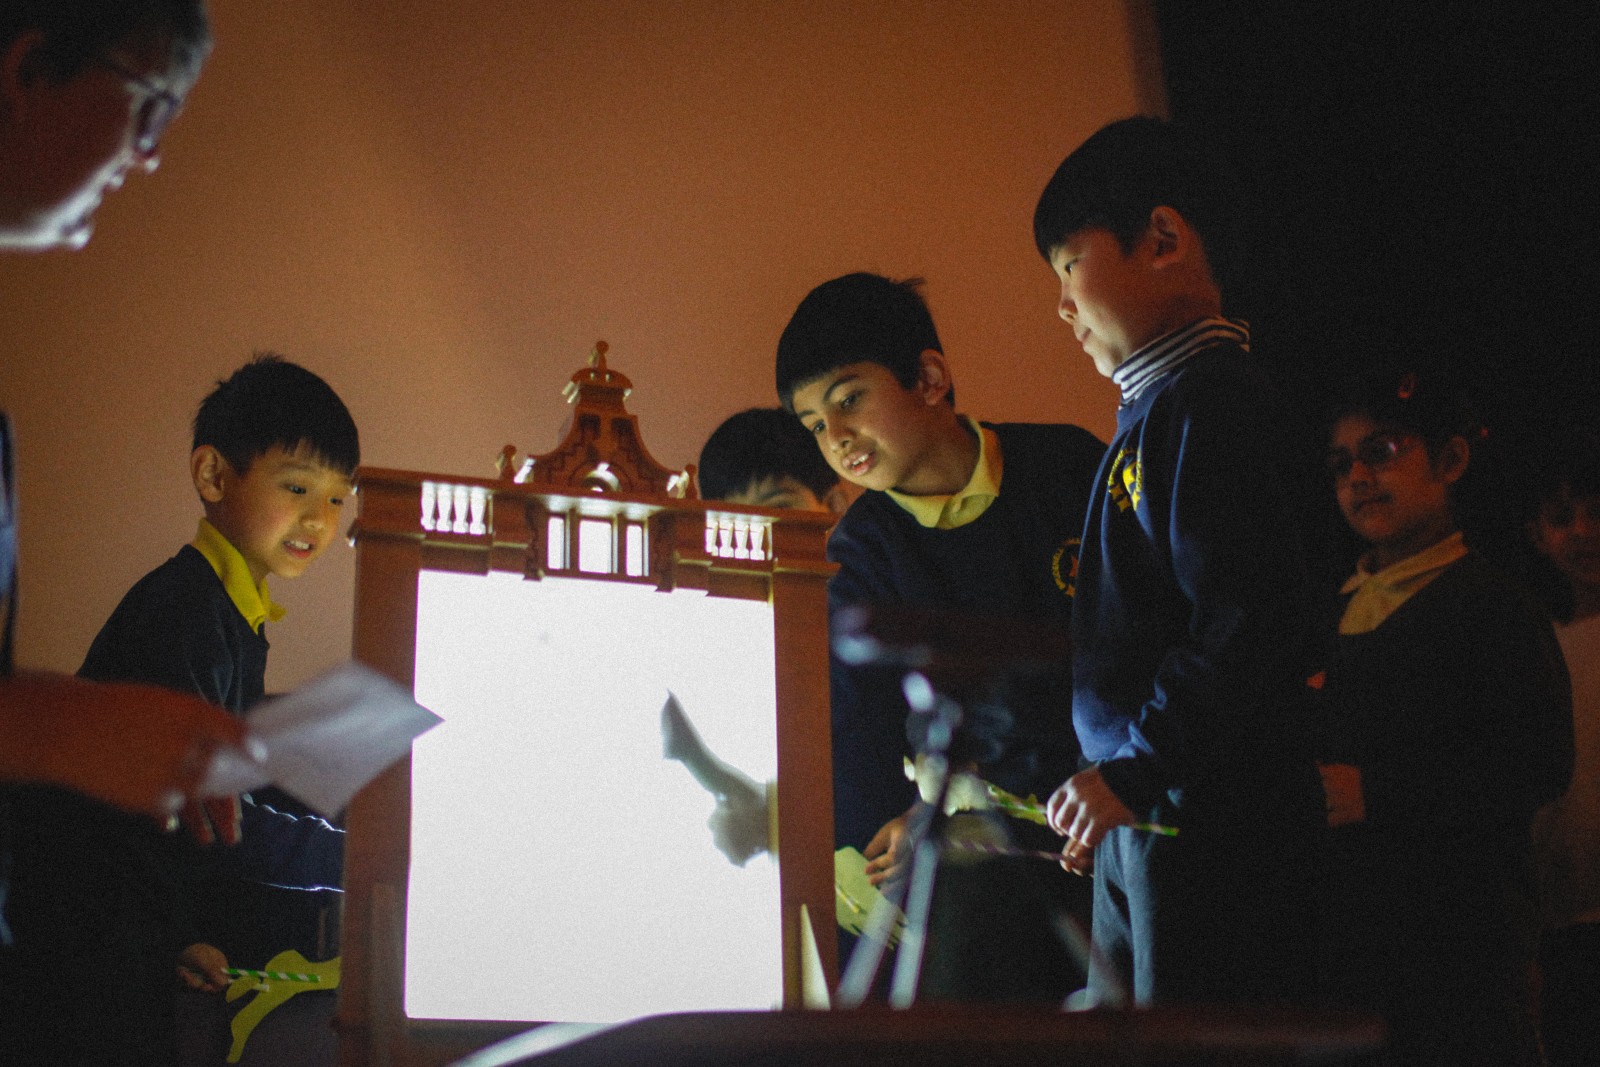 Shadow puppets workshop.